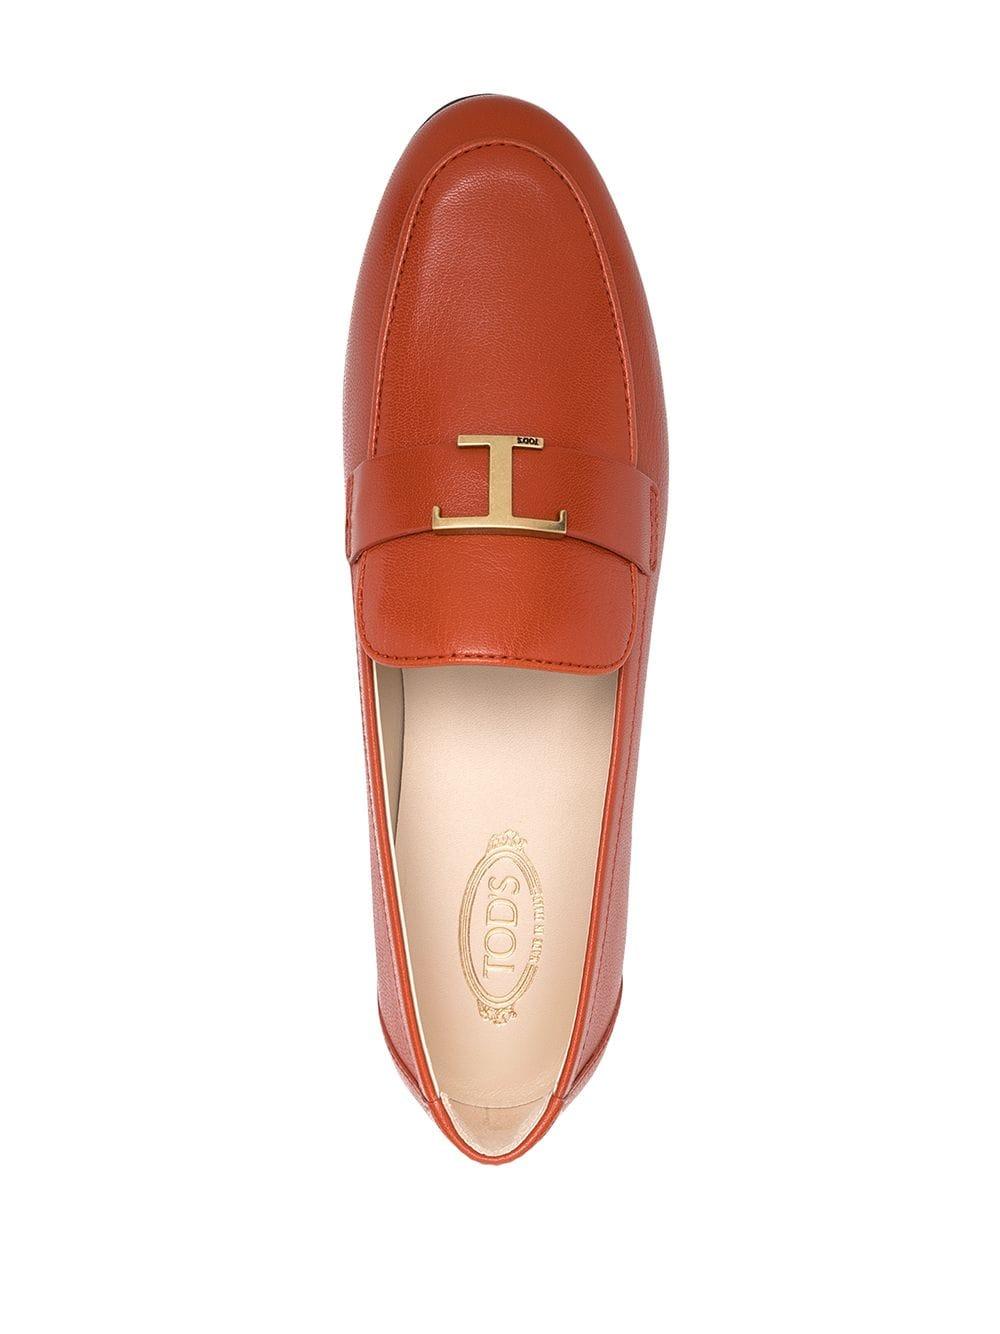 Tod's Logo Plaque Leather Loafers in Brown - Lyst